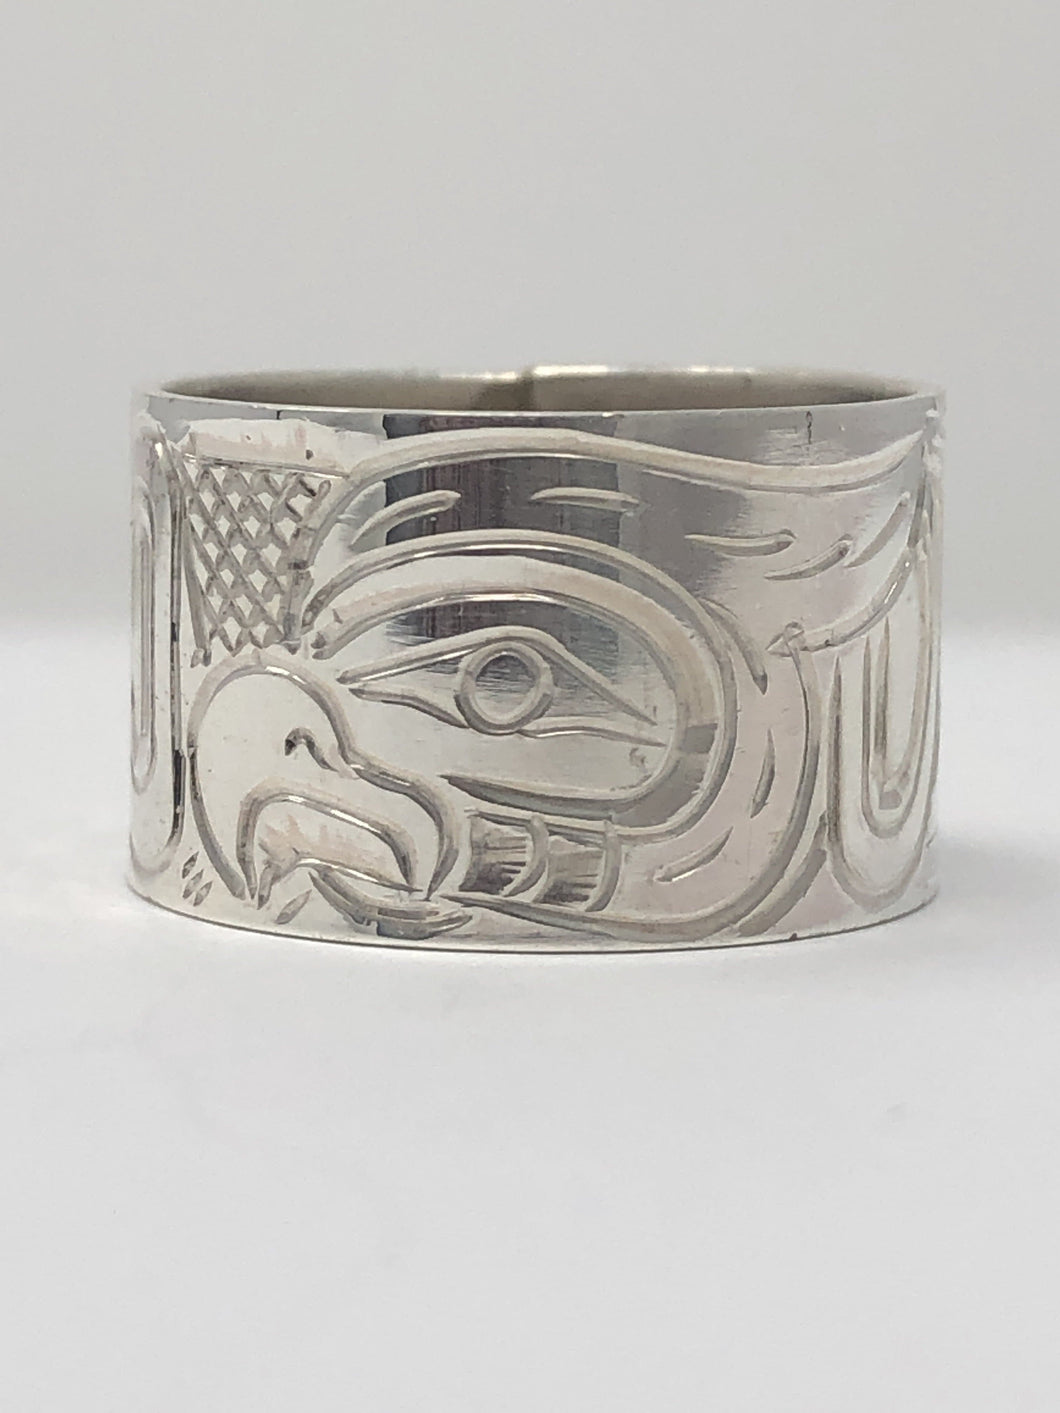 1/2” Owl Ring - Size 9 By Billy Cook